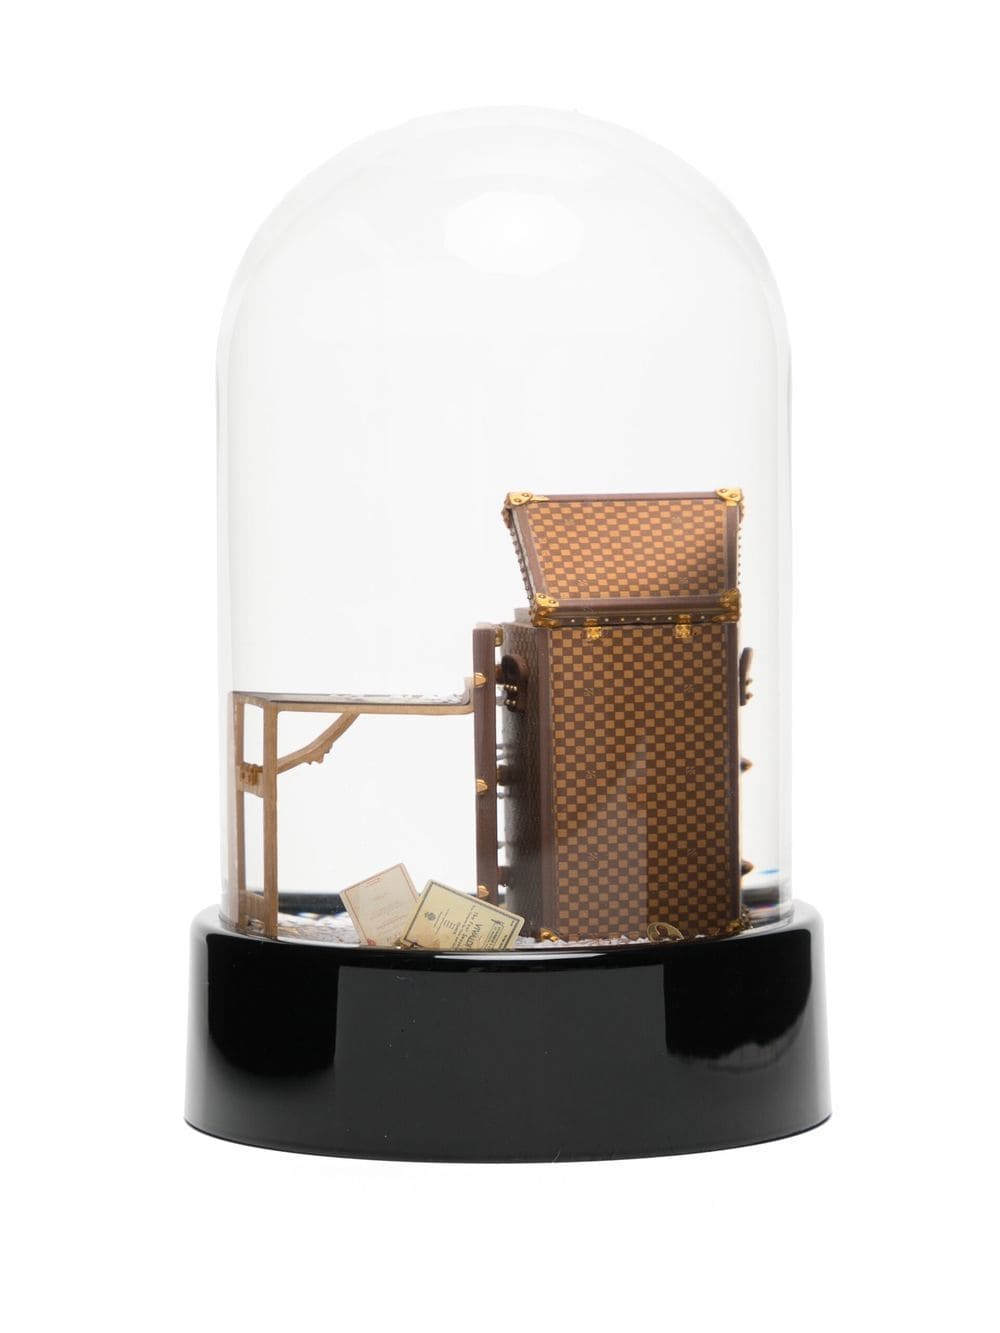 A TRIO OF LIMITED EDITION SNOW GLOBES, LOUIS VUITTON, 2011, 2012